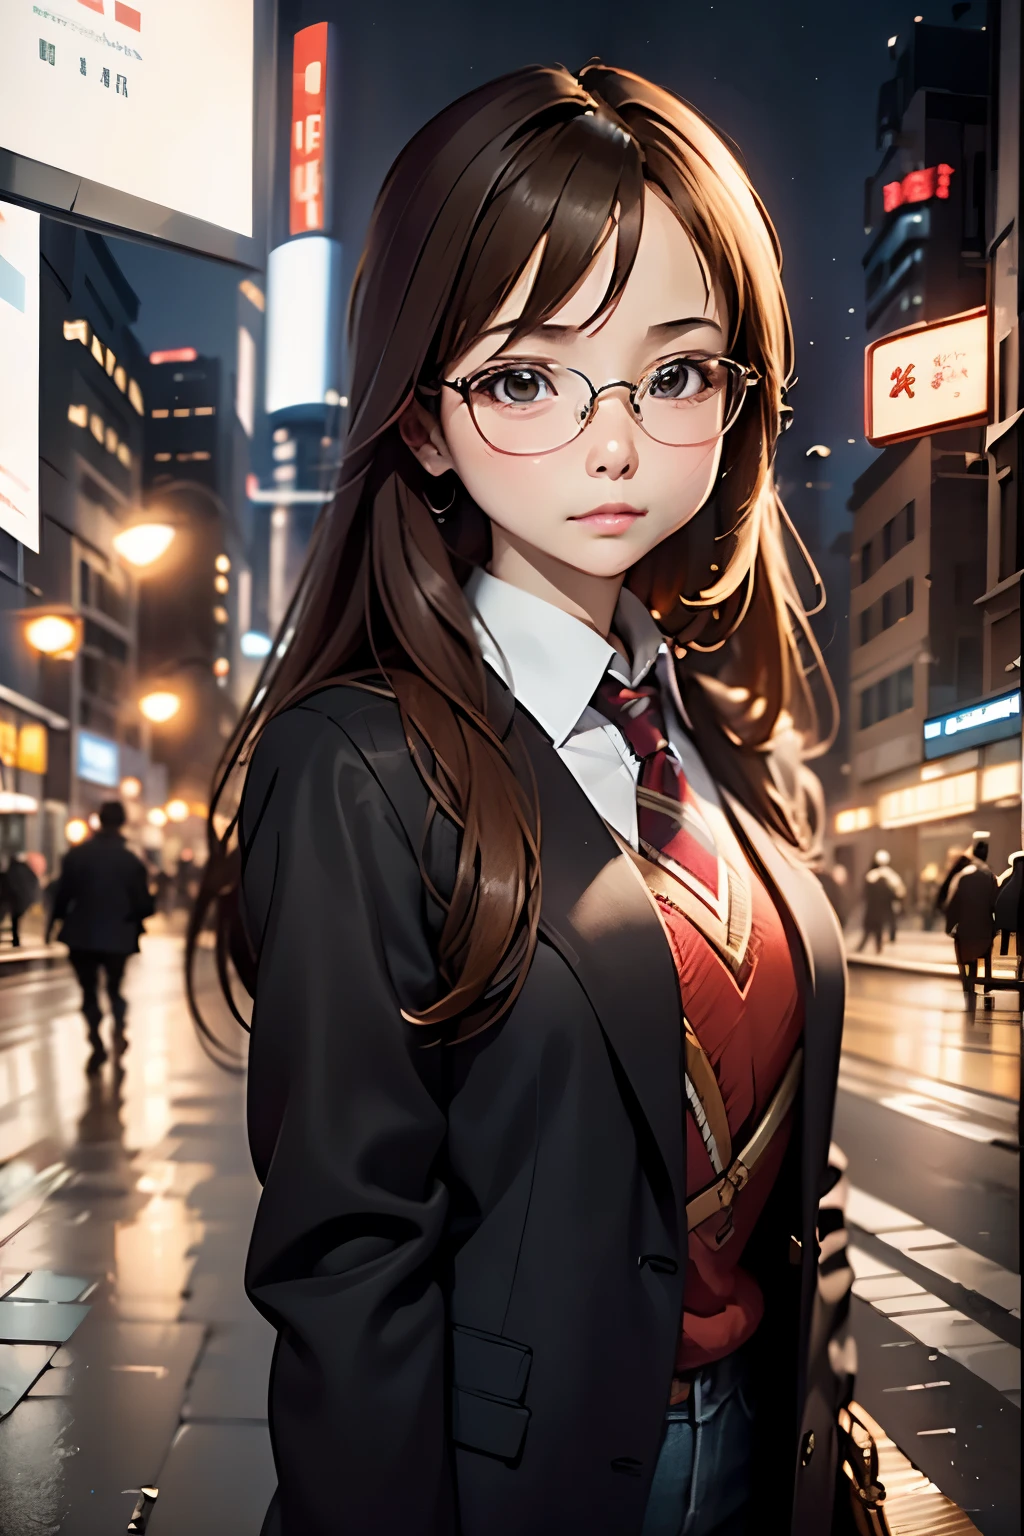 (disorganized, High resolution, Super detailed, realistic, ), 1 girl,mature, alone, long brown hair suit,brown eyes,  (Glasseodern city background, Super detailedな, highest quality, Detail view, vectorized, 8K,  graphic design, vector lines, Full HD，whole body